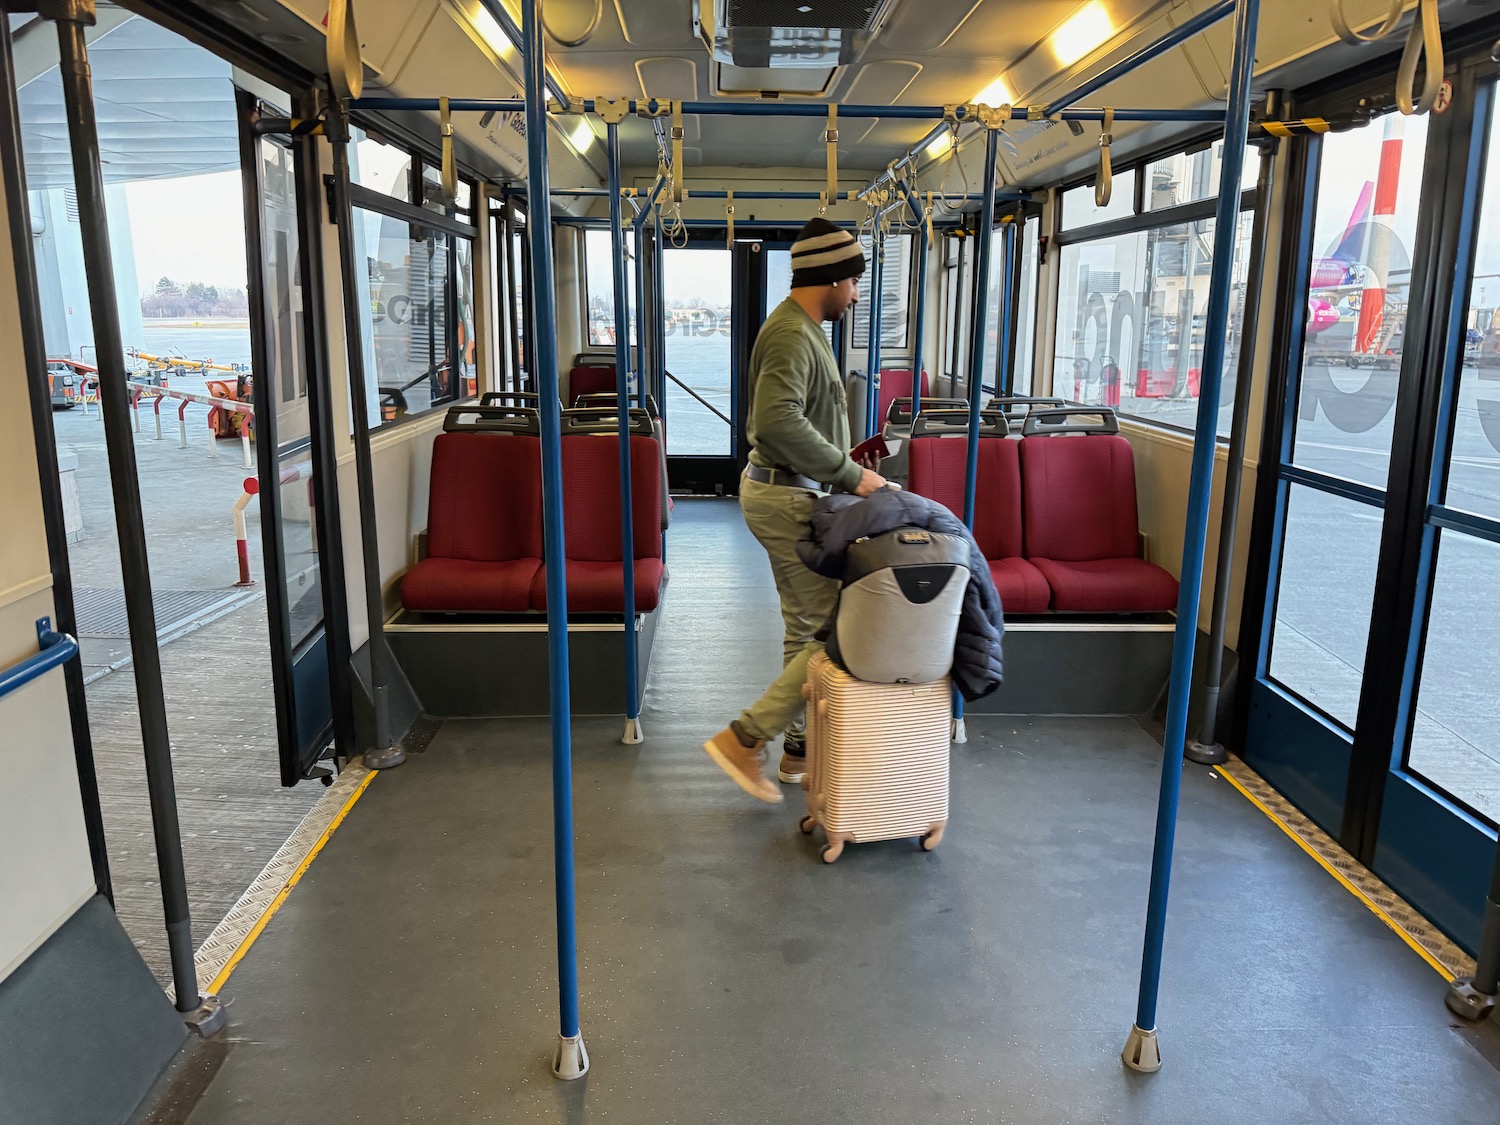 a man pushing a luggage on a bus